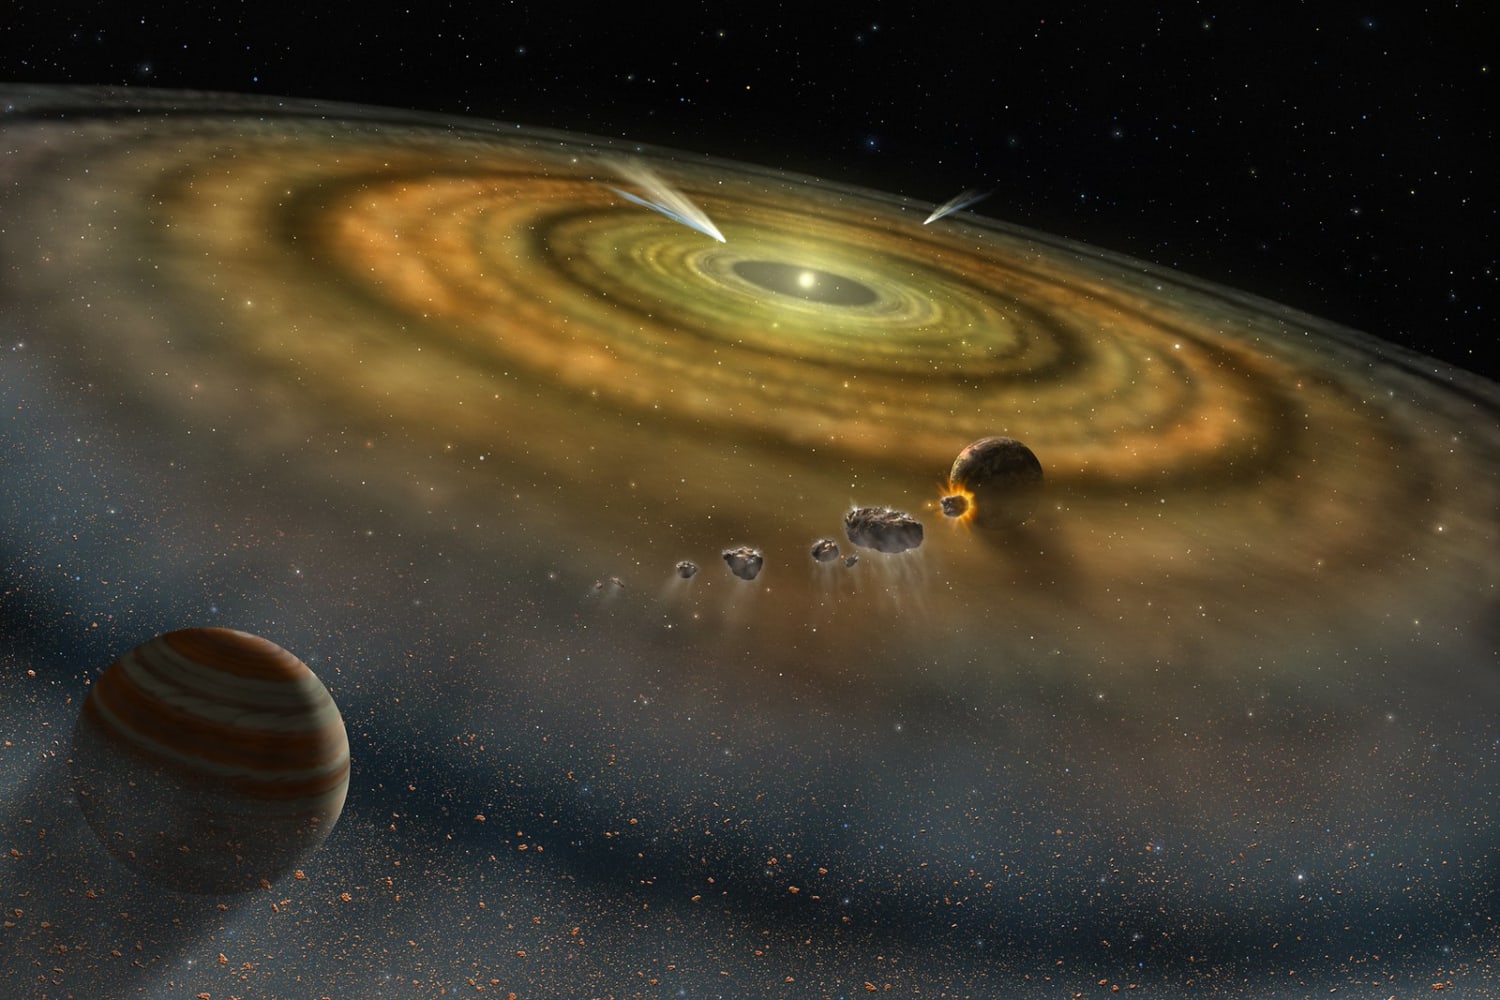 Super-Strong Electric Forces May Have Helped Tiny Clumps of Dust Seed the Planets